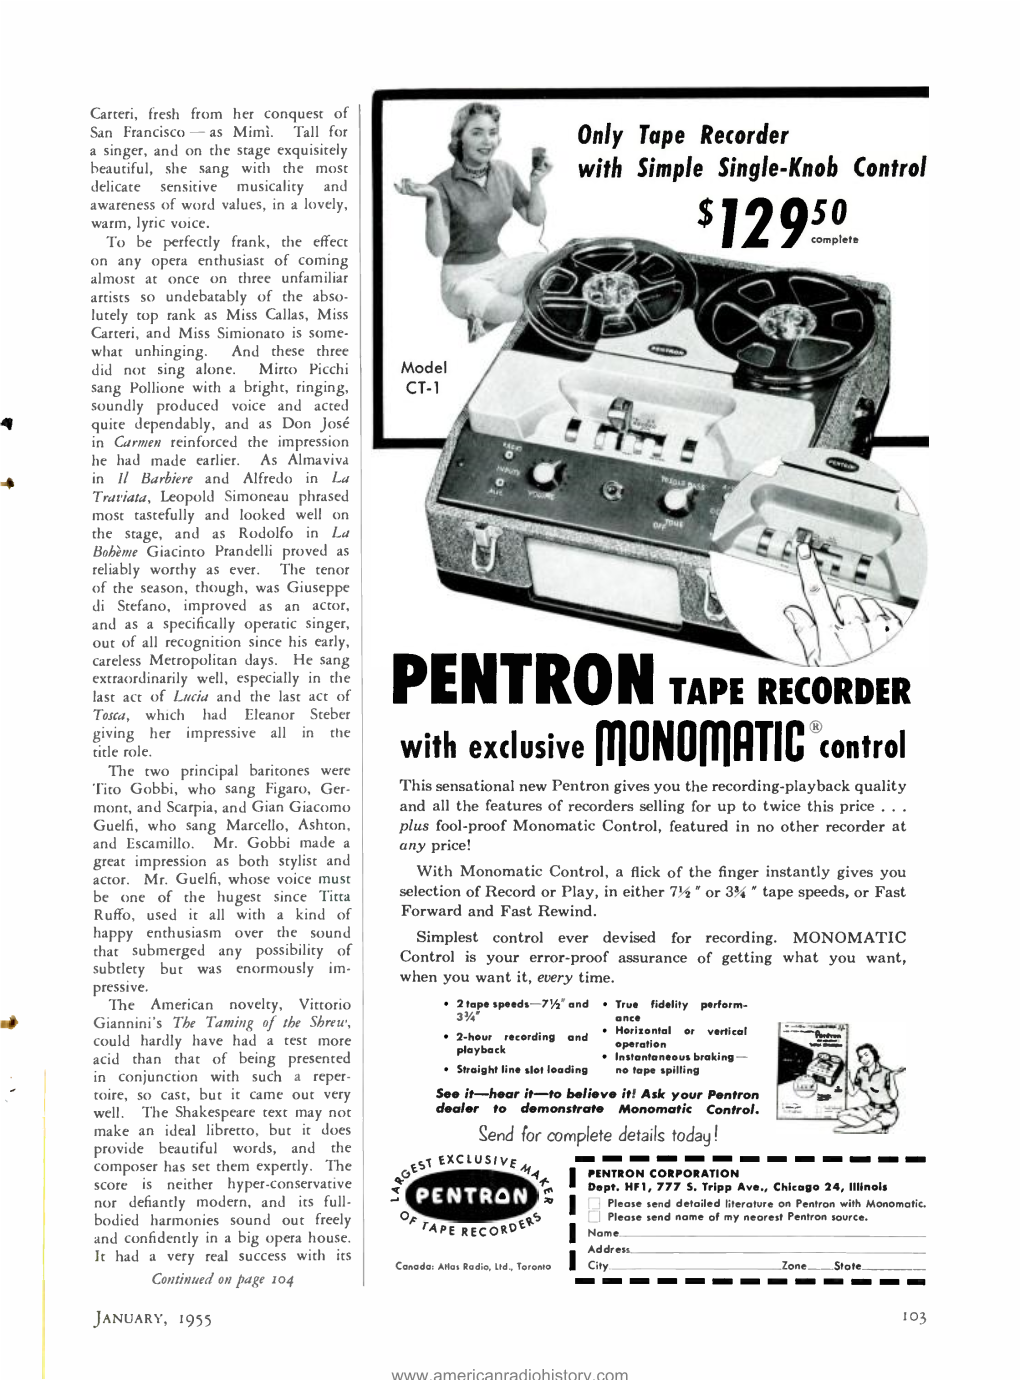 PENTRON TAPE RECORDER Tosca, Which Had Eleanor Steber Giving Her Impressive All in the Title Role